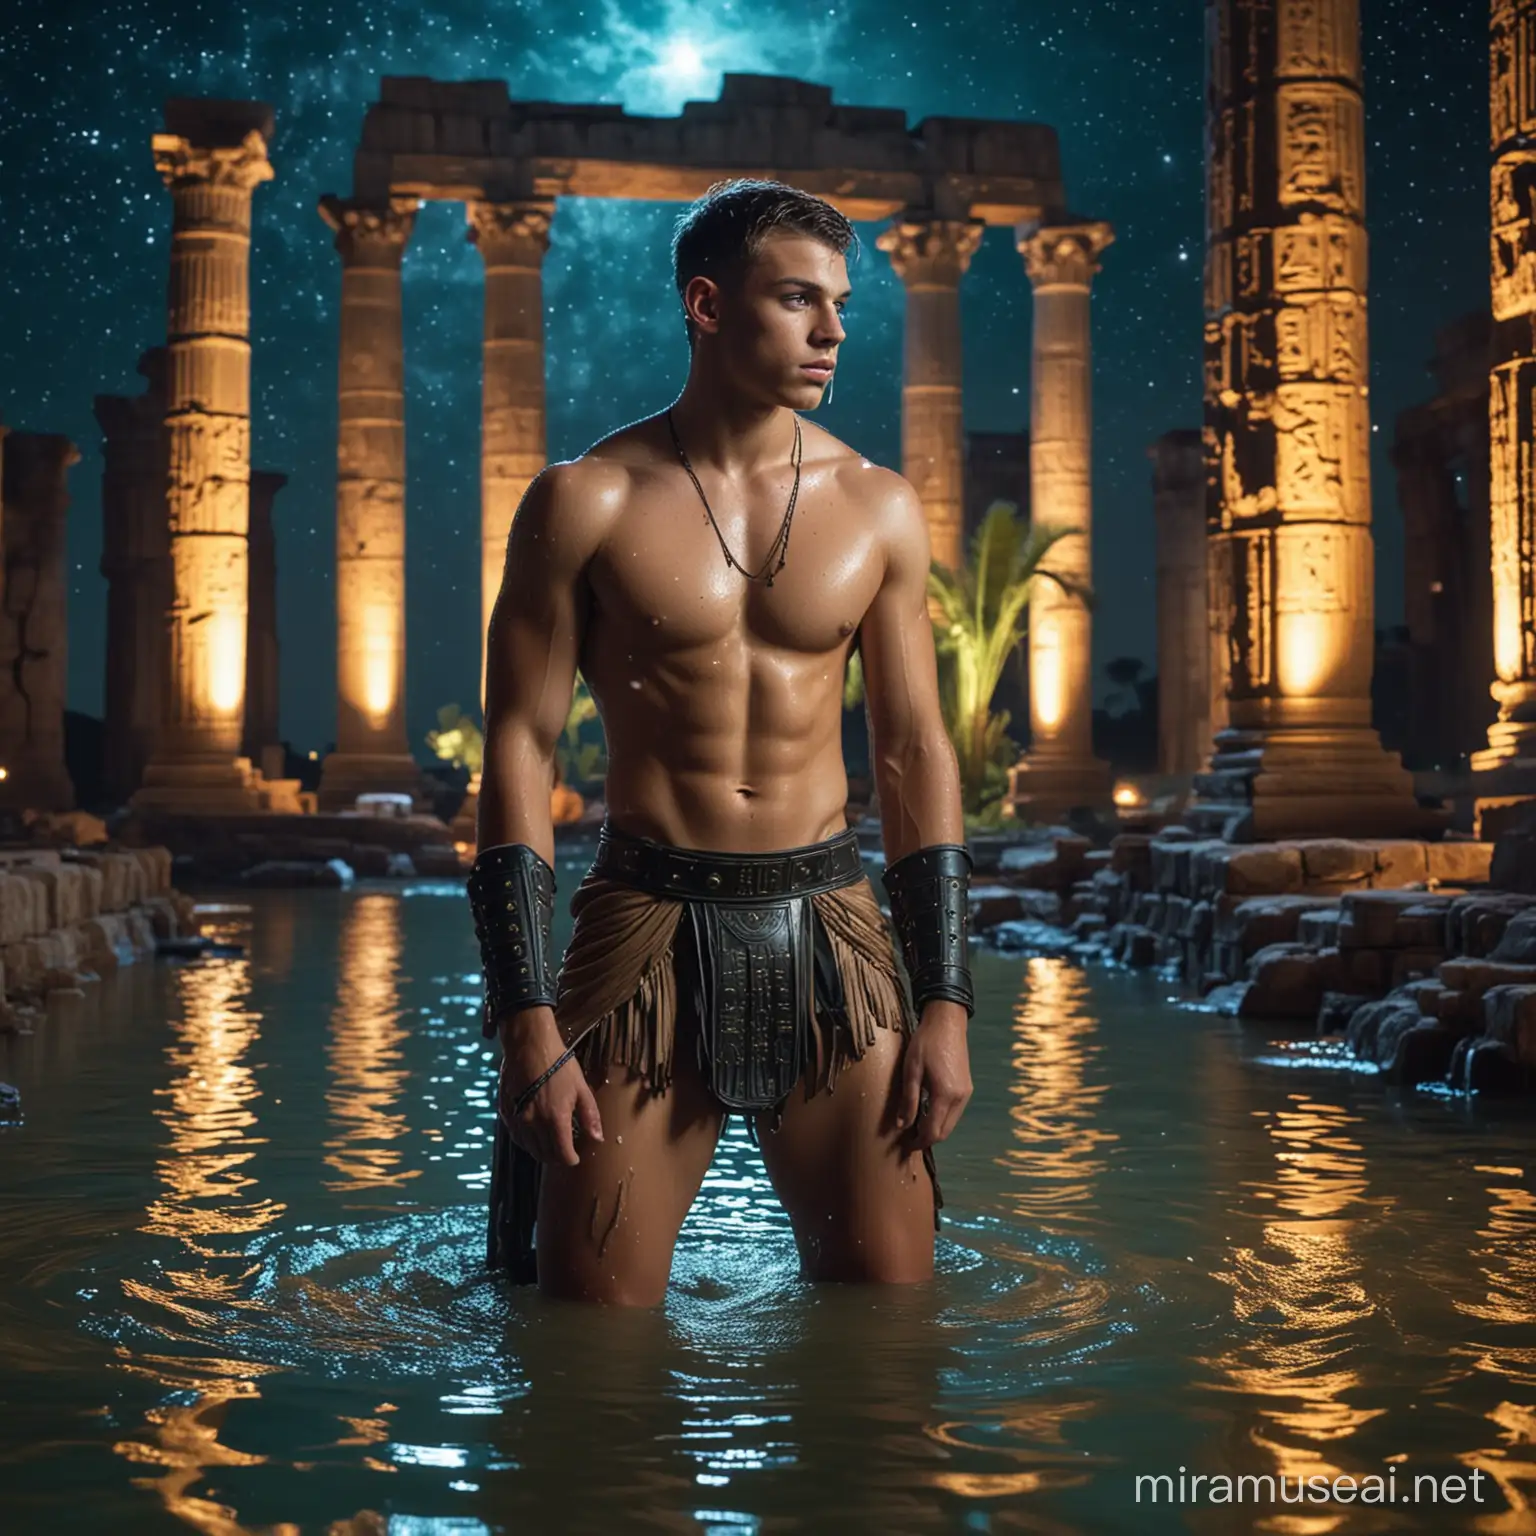 Sensual Roman Soldier Teen Boy Crouching in Oasis Amidst Egyptian Ruins